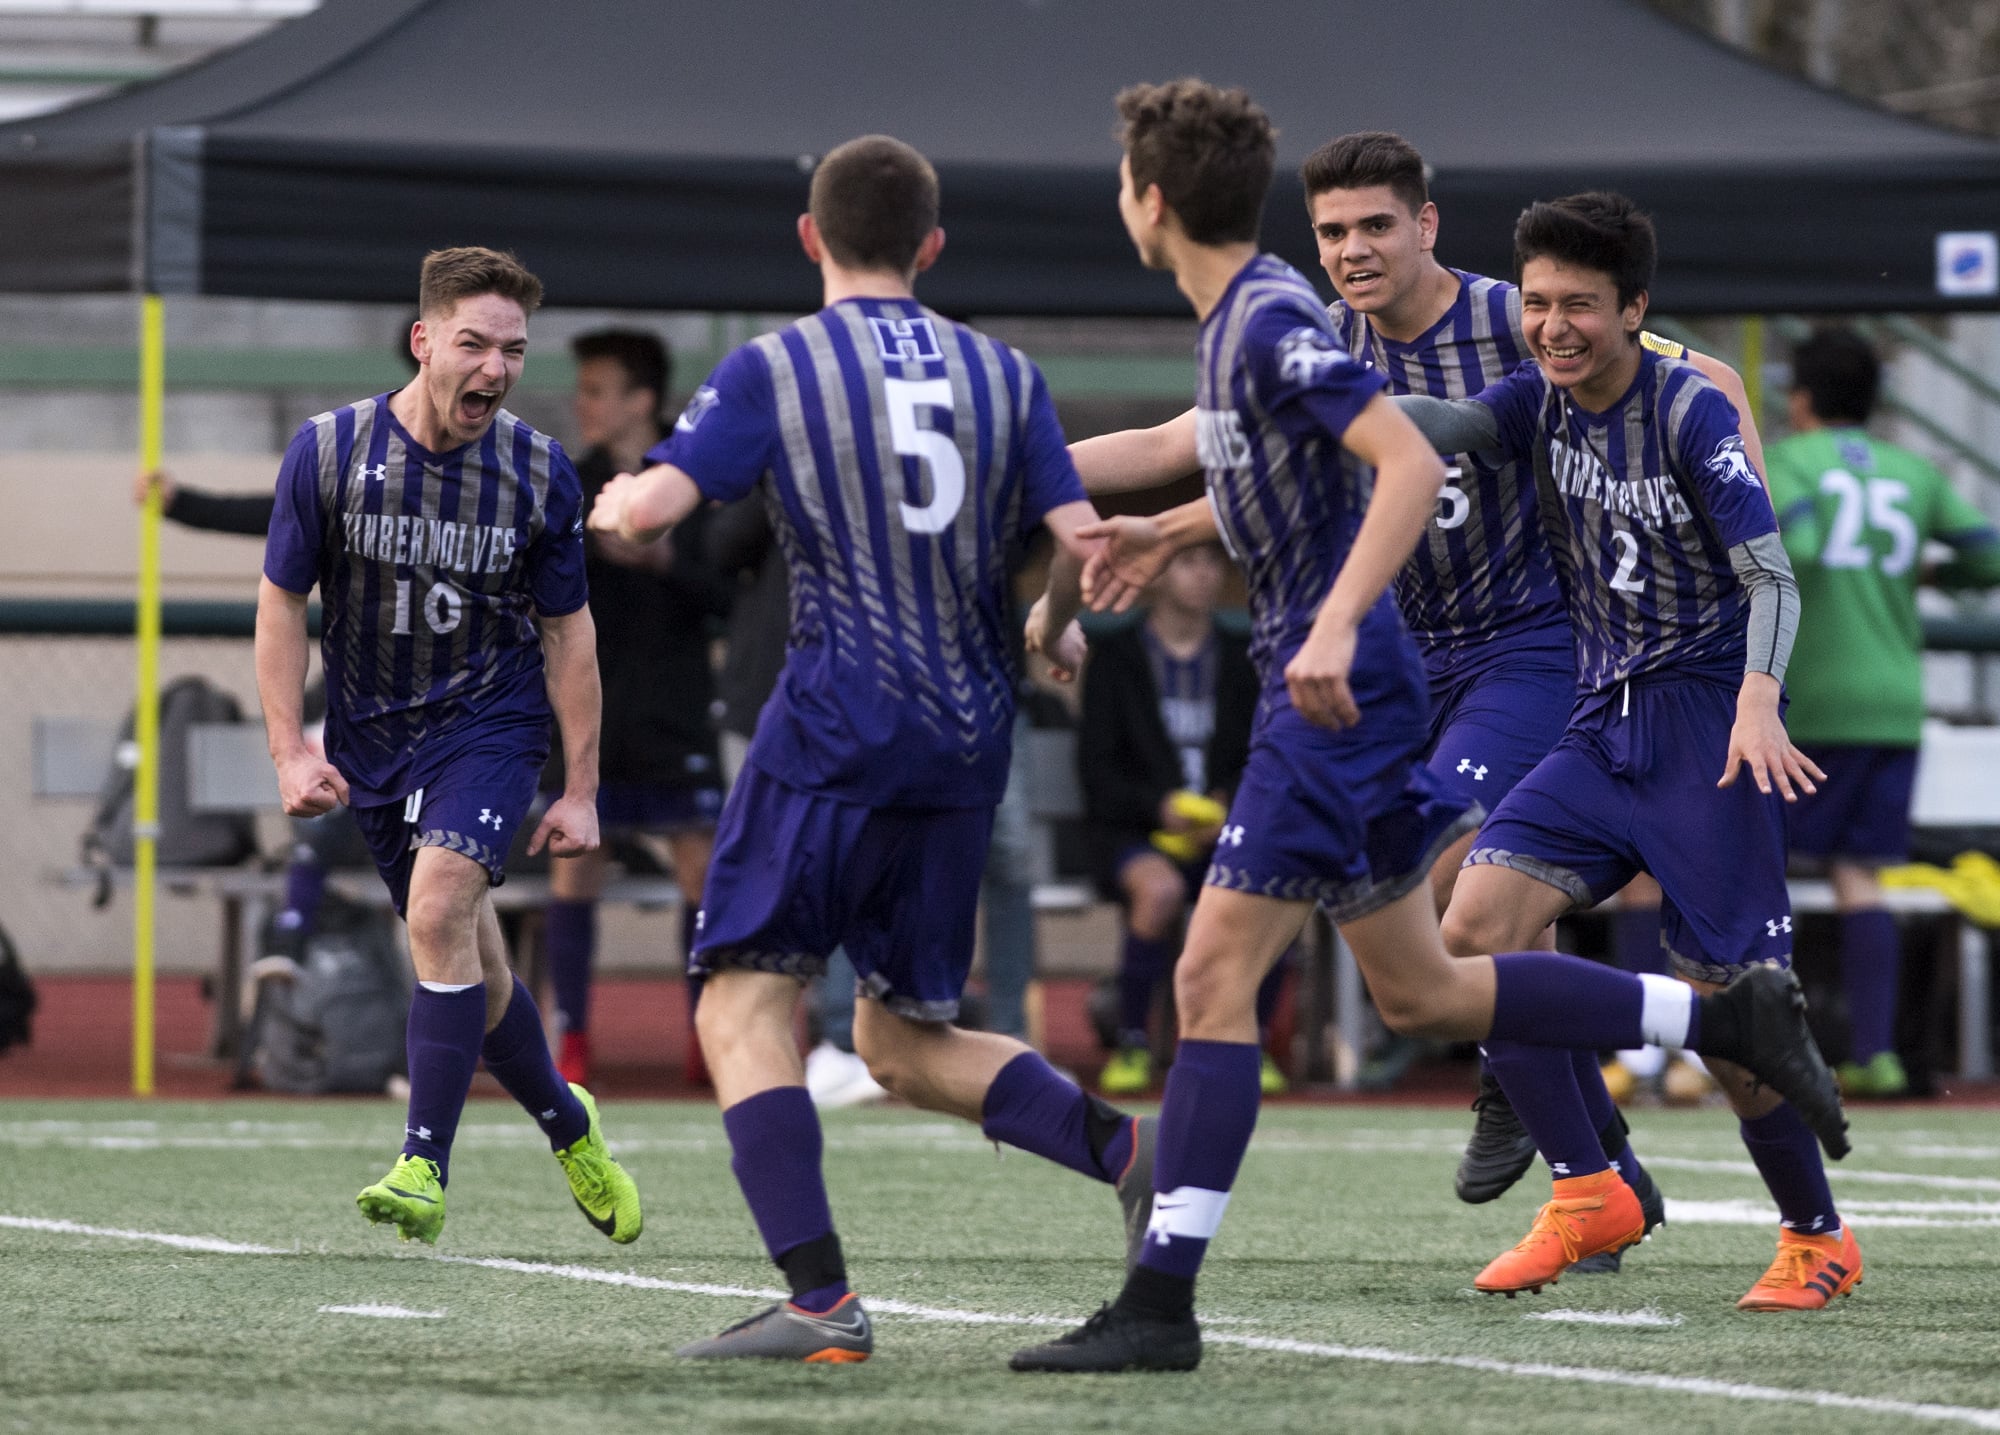 Heritage celebrates their first goal against Skyview during Tuesday night's soccer game at McKenzie Stadium in Vancouver on March 26, 2019.